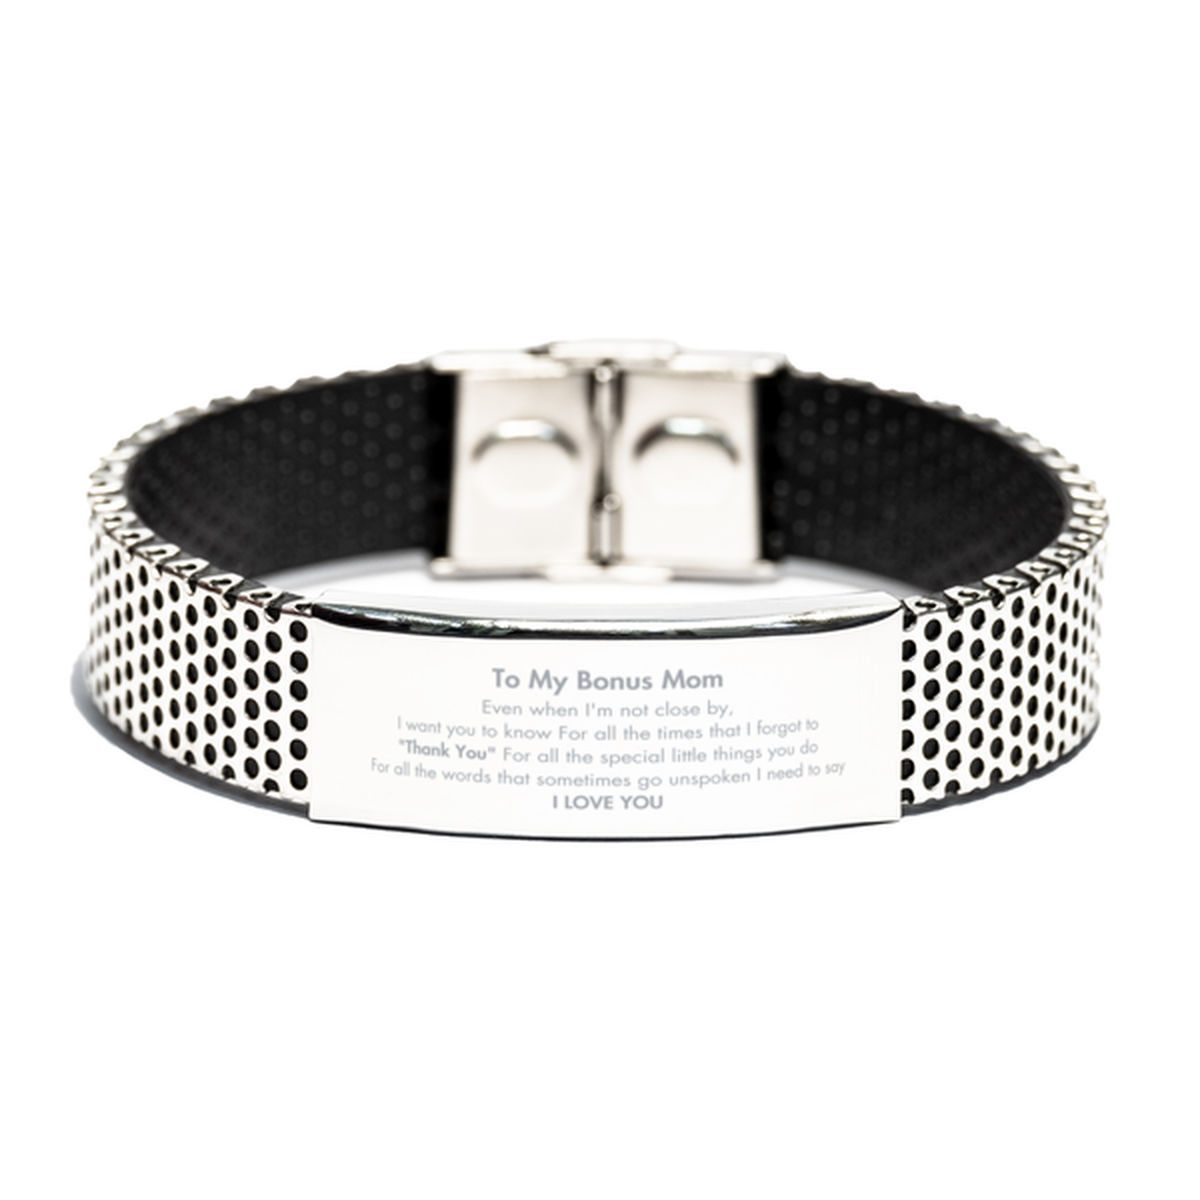 Thank You Gifts for Bonus Mom, Keepsake Stainless Steel Bracelet Gifts for Bonus Mom Birthday Mother's day Father's Day Bonus Mom For all the words That sometimes go unspoken I need to say I LOVE YOU